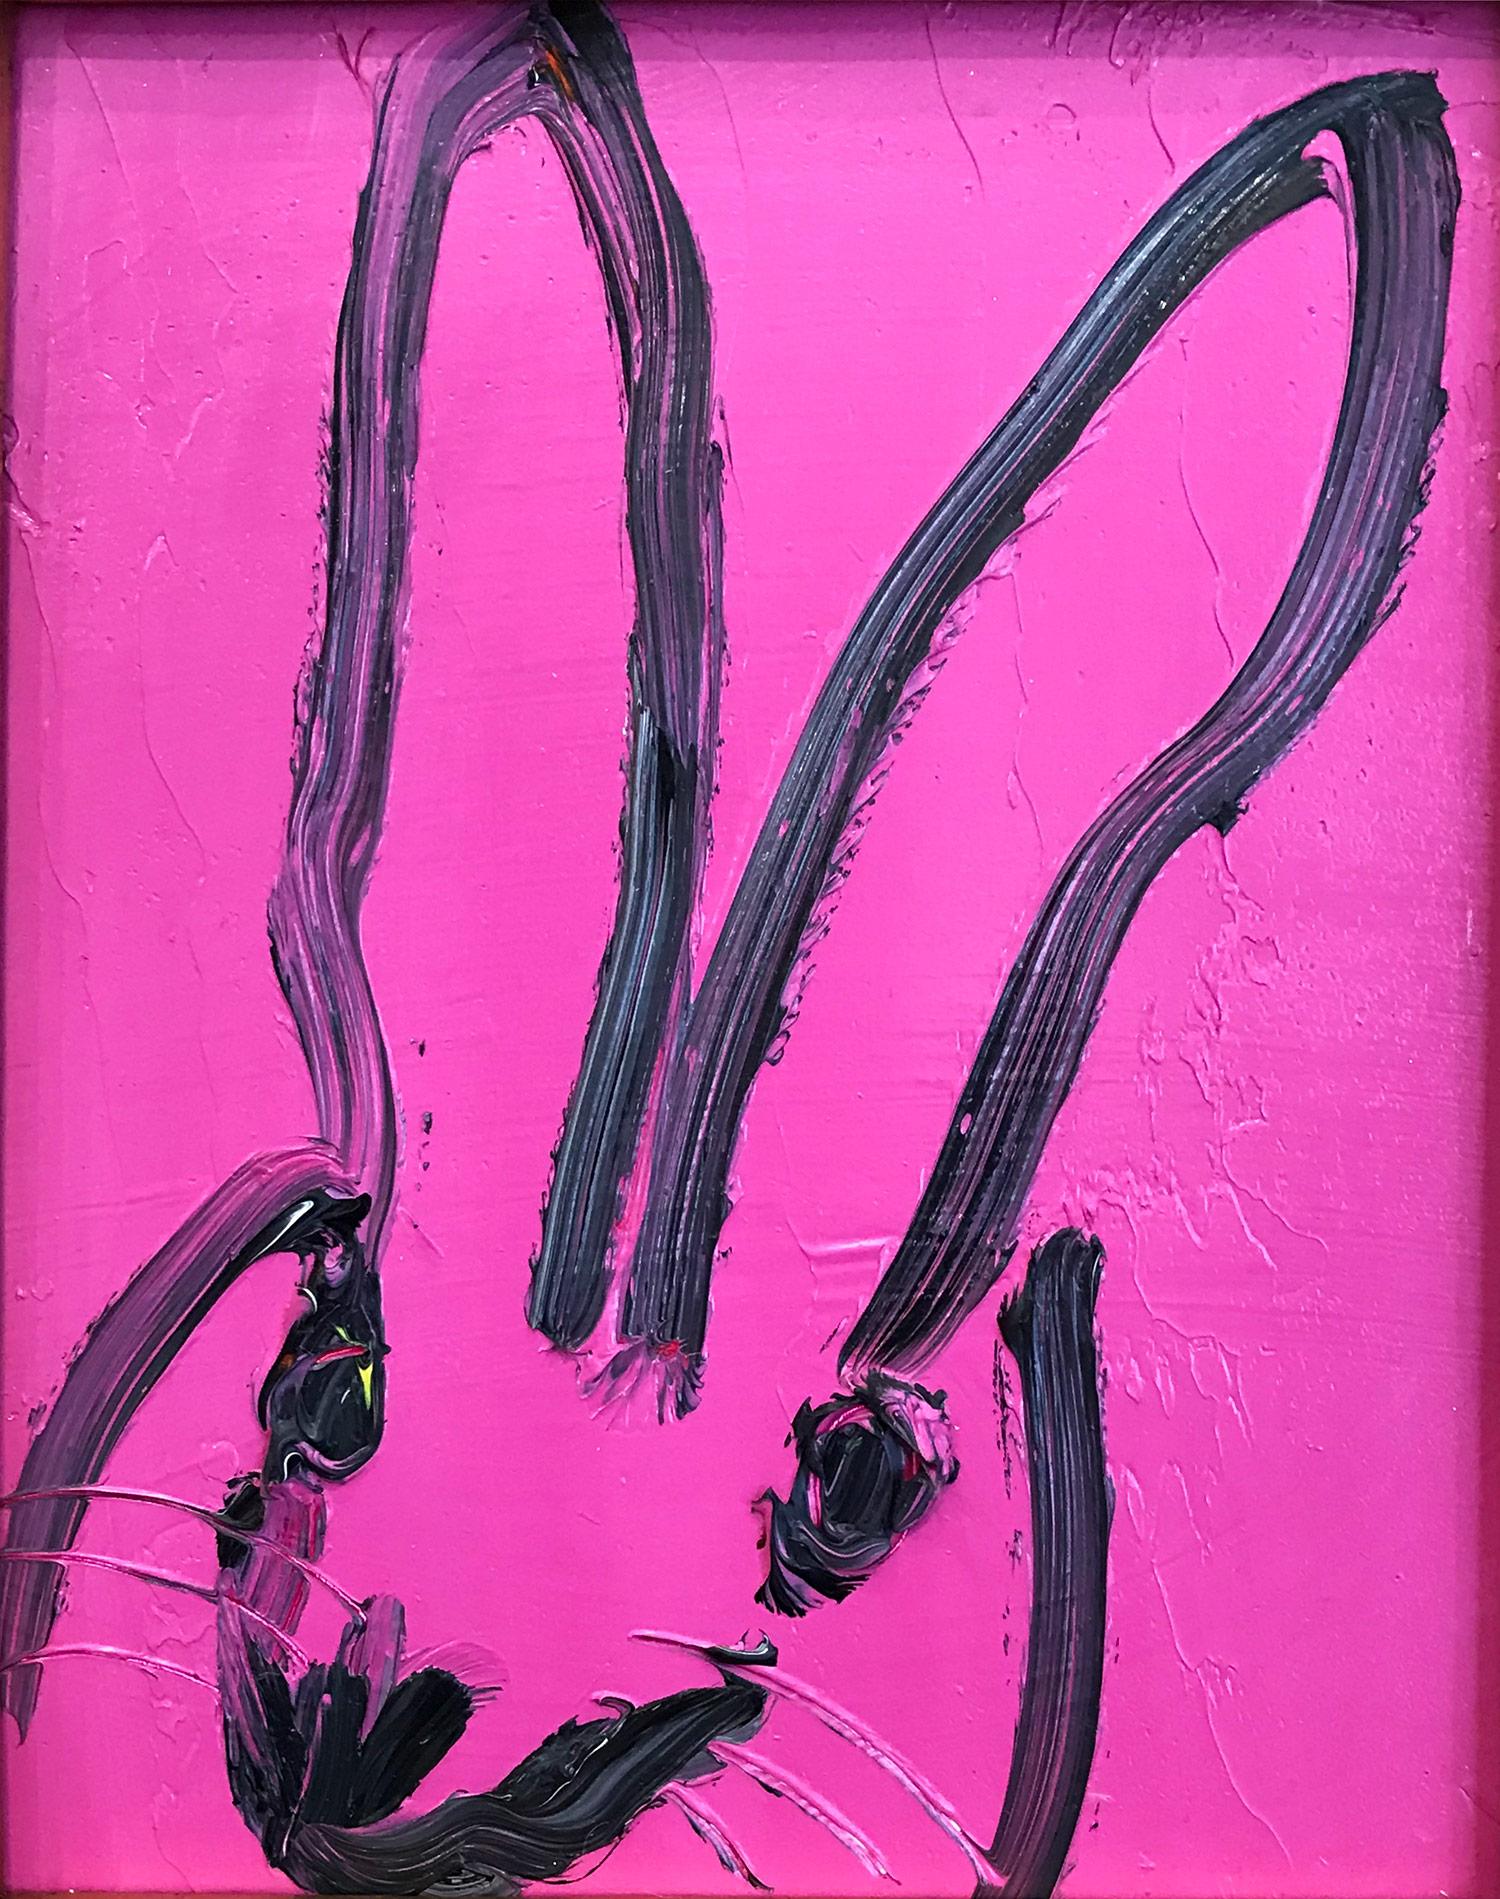 Untitled (Bunny on Hot Pink) - Painting by Hunt Slonem